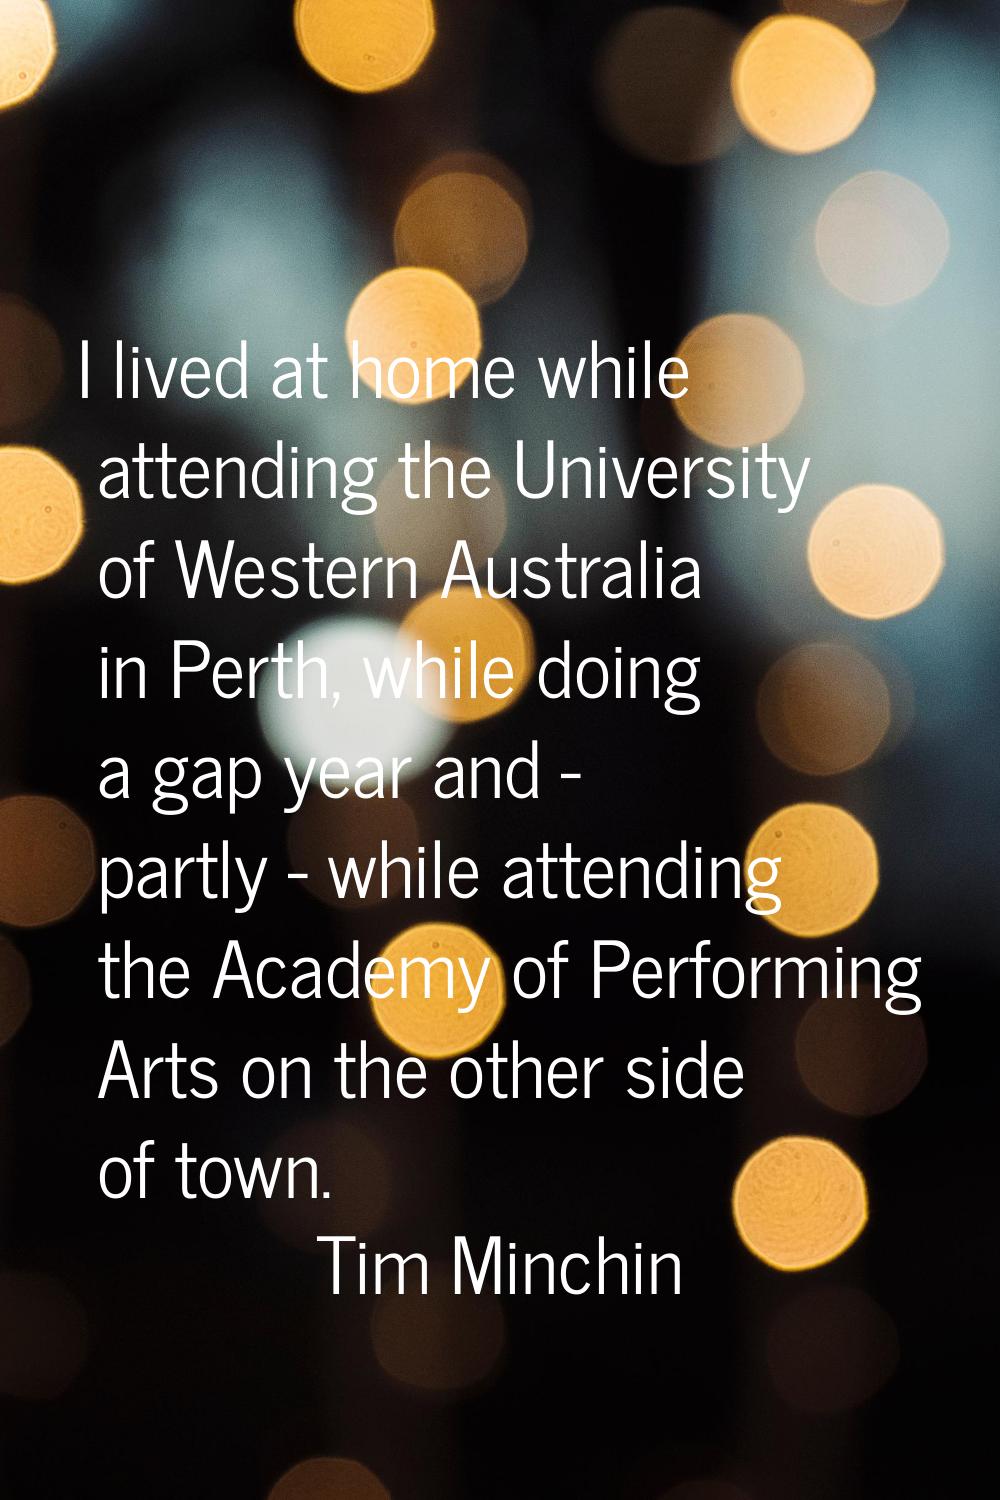 I lived at home while attending the University of Western Australia in Perth, while doing a gap yea